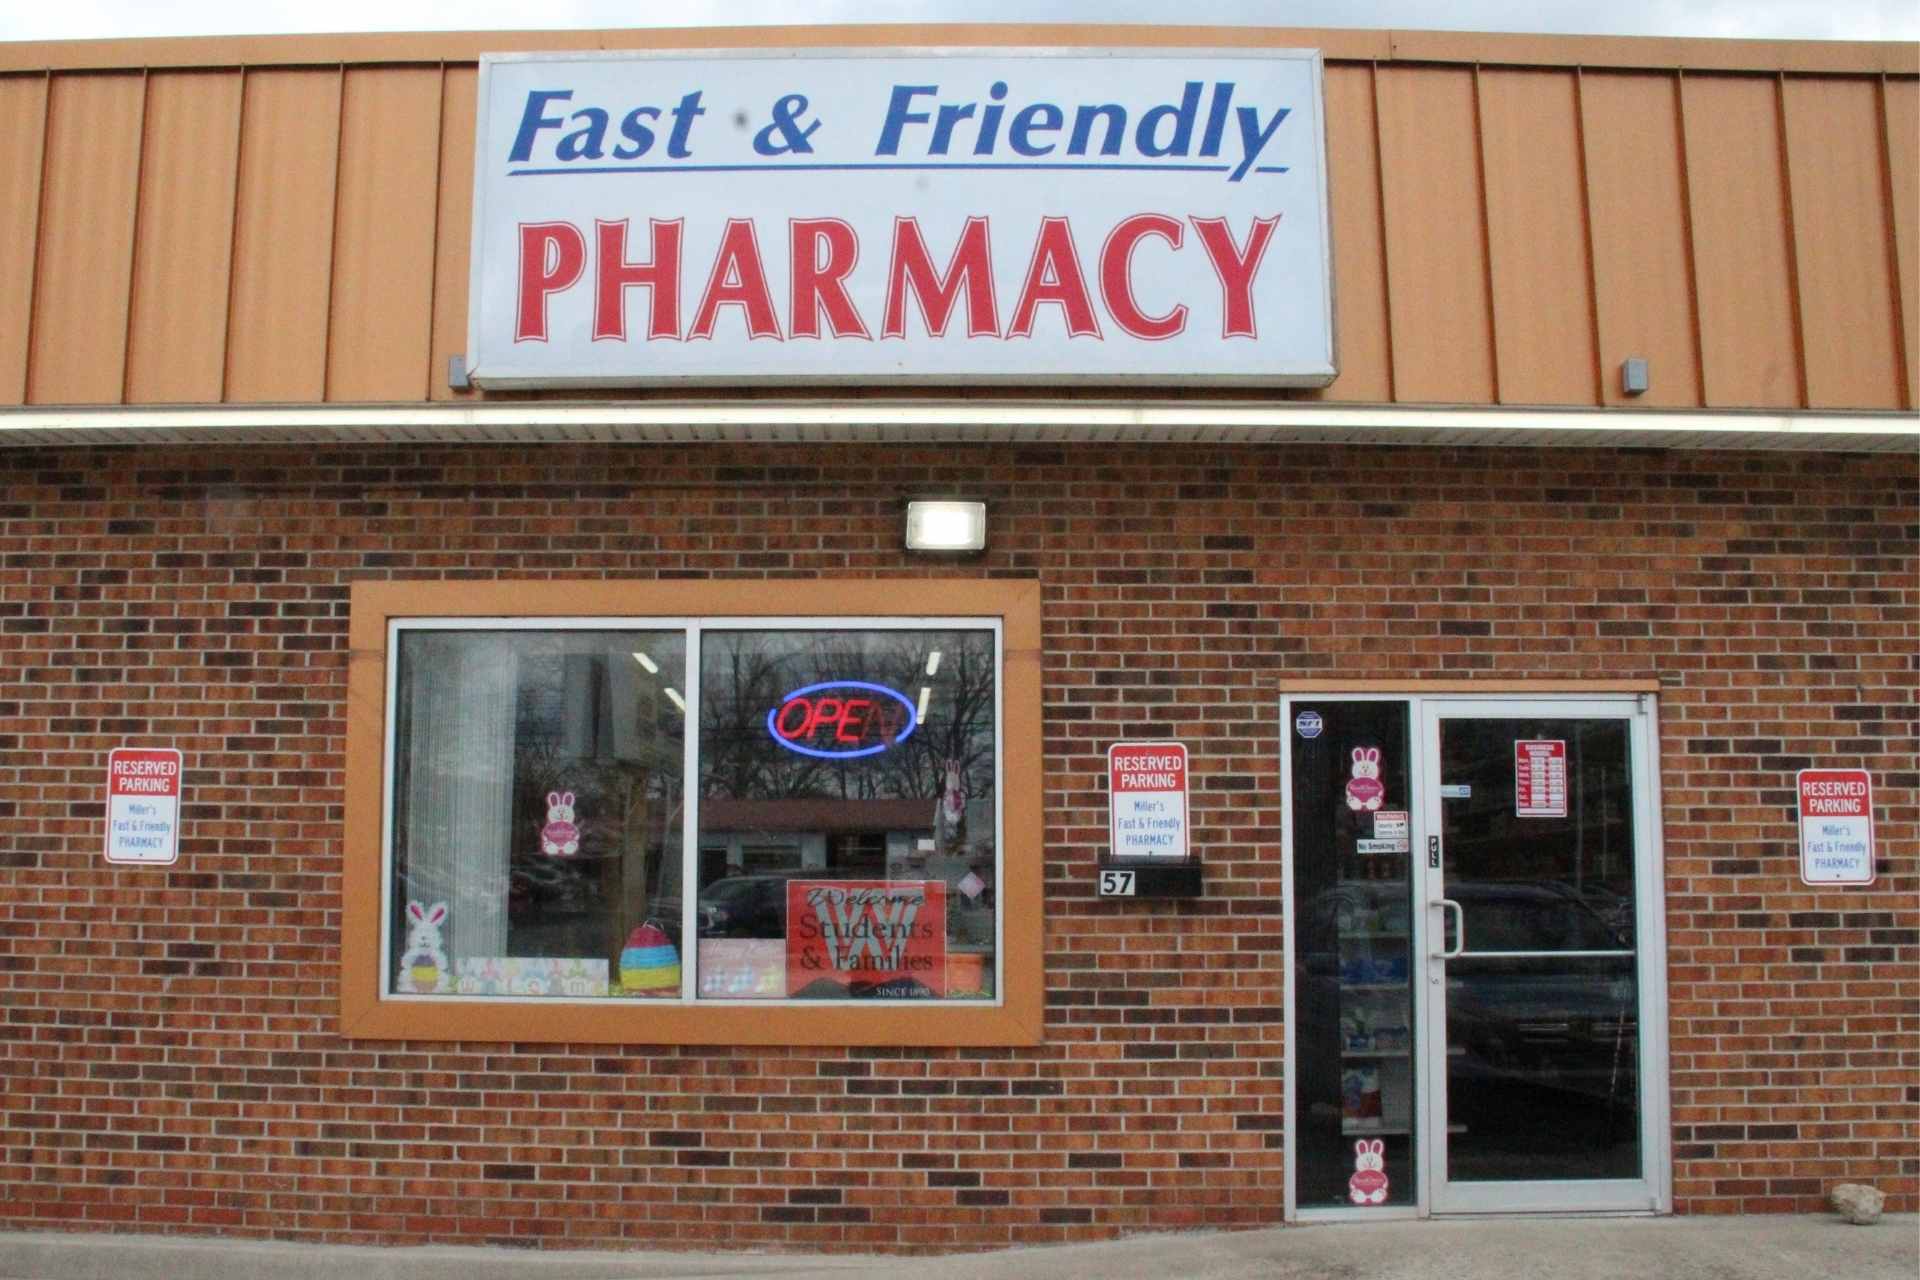 Fast and Friendly Pharmacy is located at 57 North Locust Street in Buckhannon, near the Donut Shop.